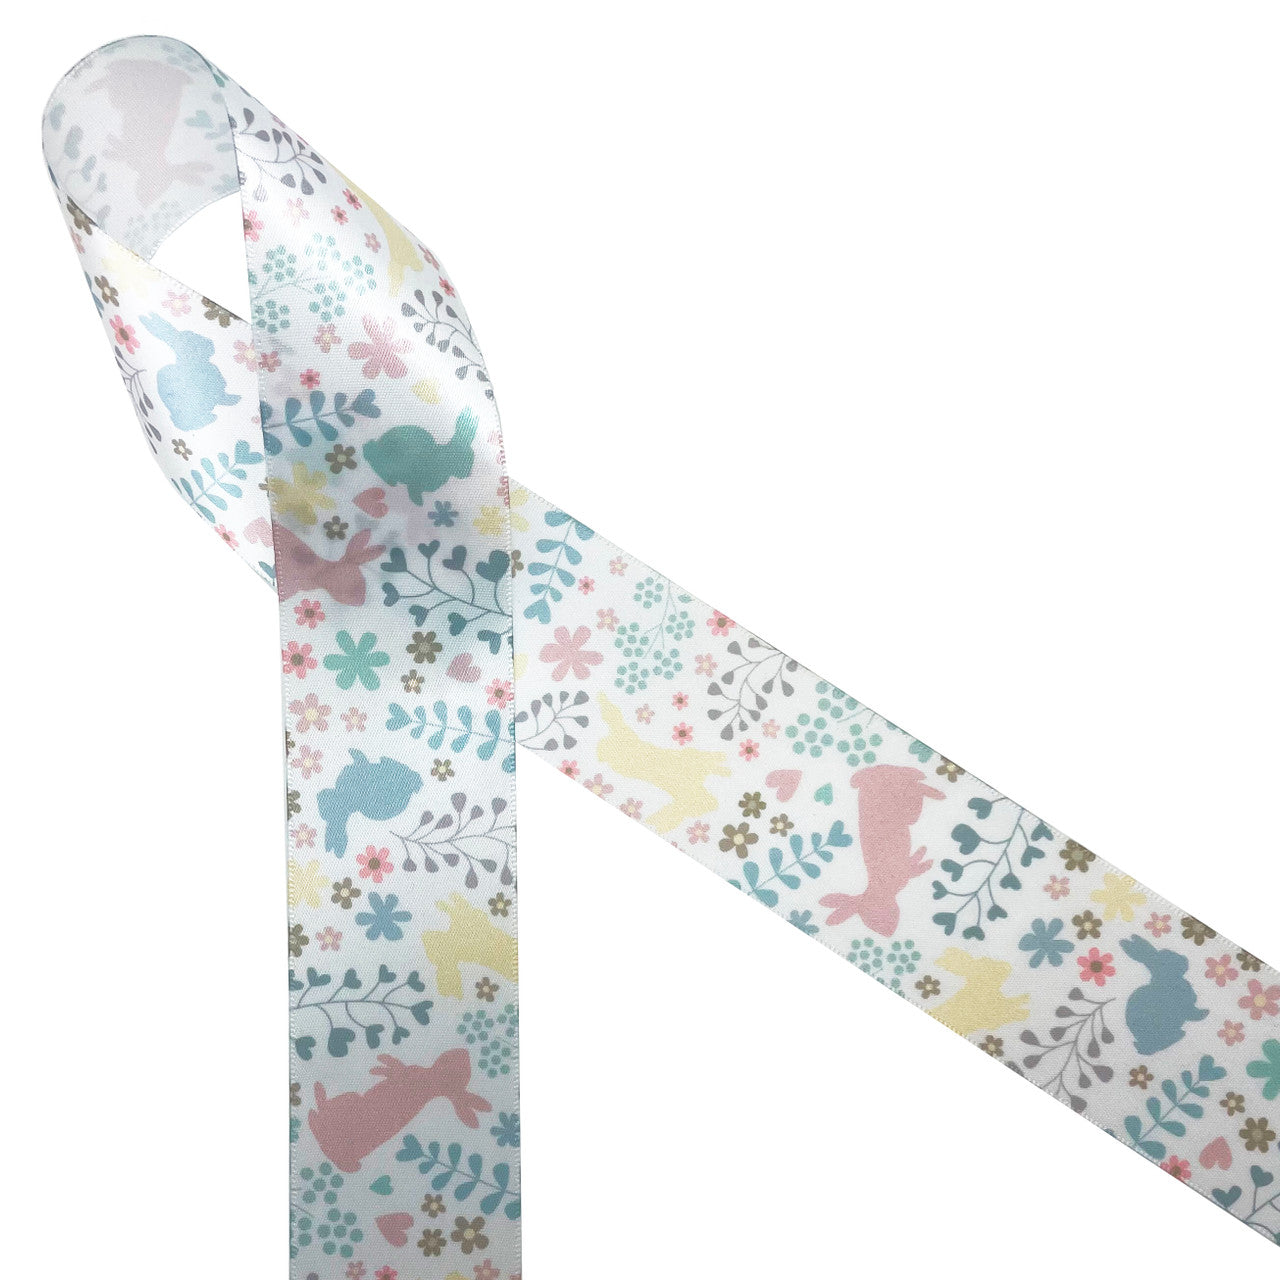 Pastel bunnies in blush pink, yellow, and teal are tossed with floral and fern printed on 1.5" white single face satin ribbon. This soft palette is perfect for Easter wreaths, Easter baskets, Easter floral designs, Spring wreaths, table decor, quilting and sewing. Be sure to  have this ribbon on hand for all your Spring  crafts. All our ribbon is designed and printed in the  USS